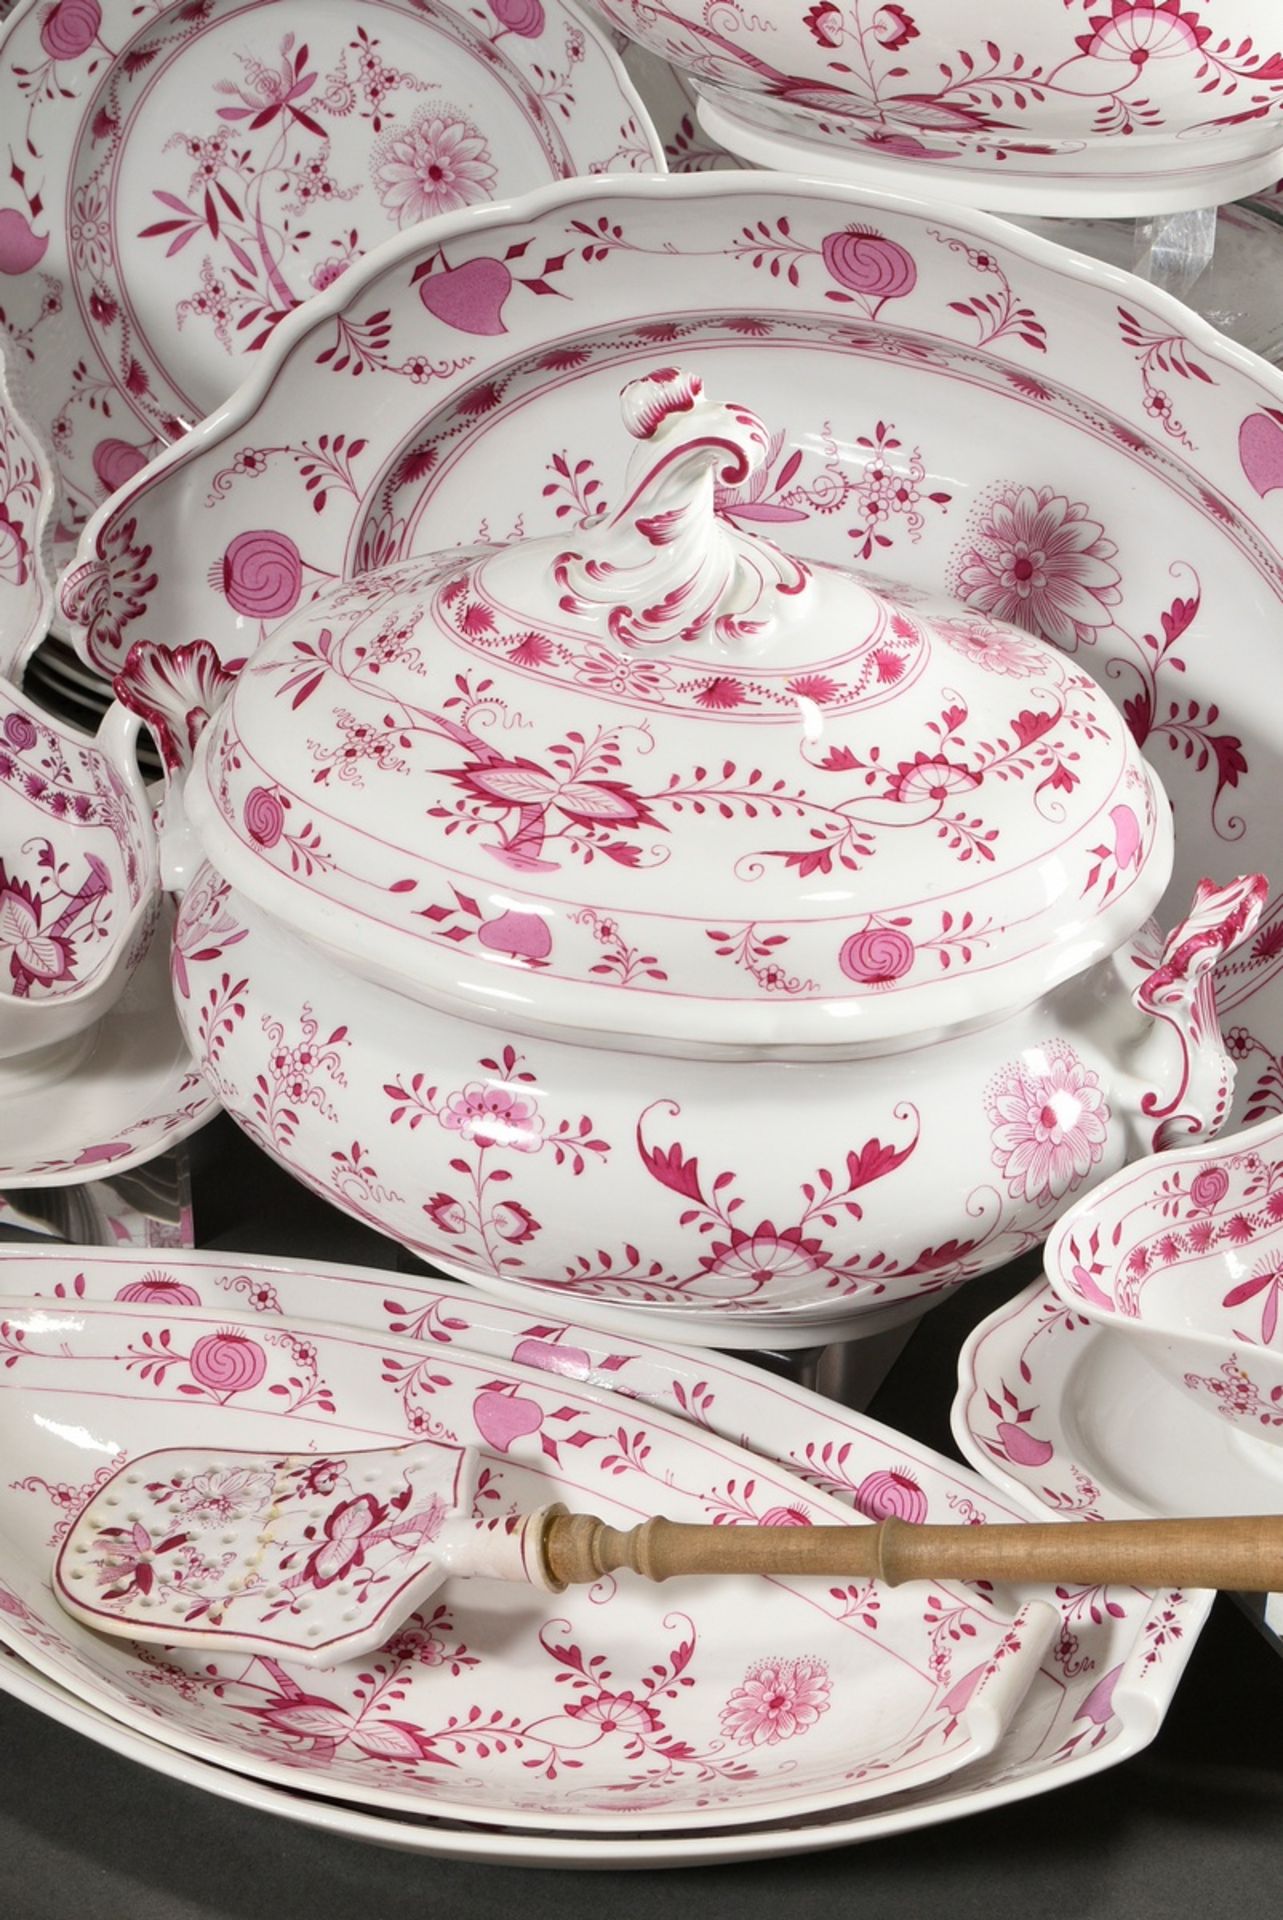 65 Pieces rare Meissen dinner service "Zwiebelmuster Pink", custom made around 1900, consisting of: - Image 7 of 27